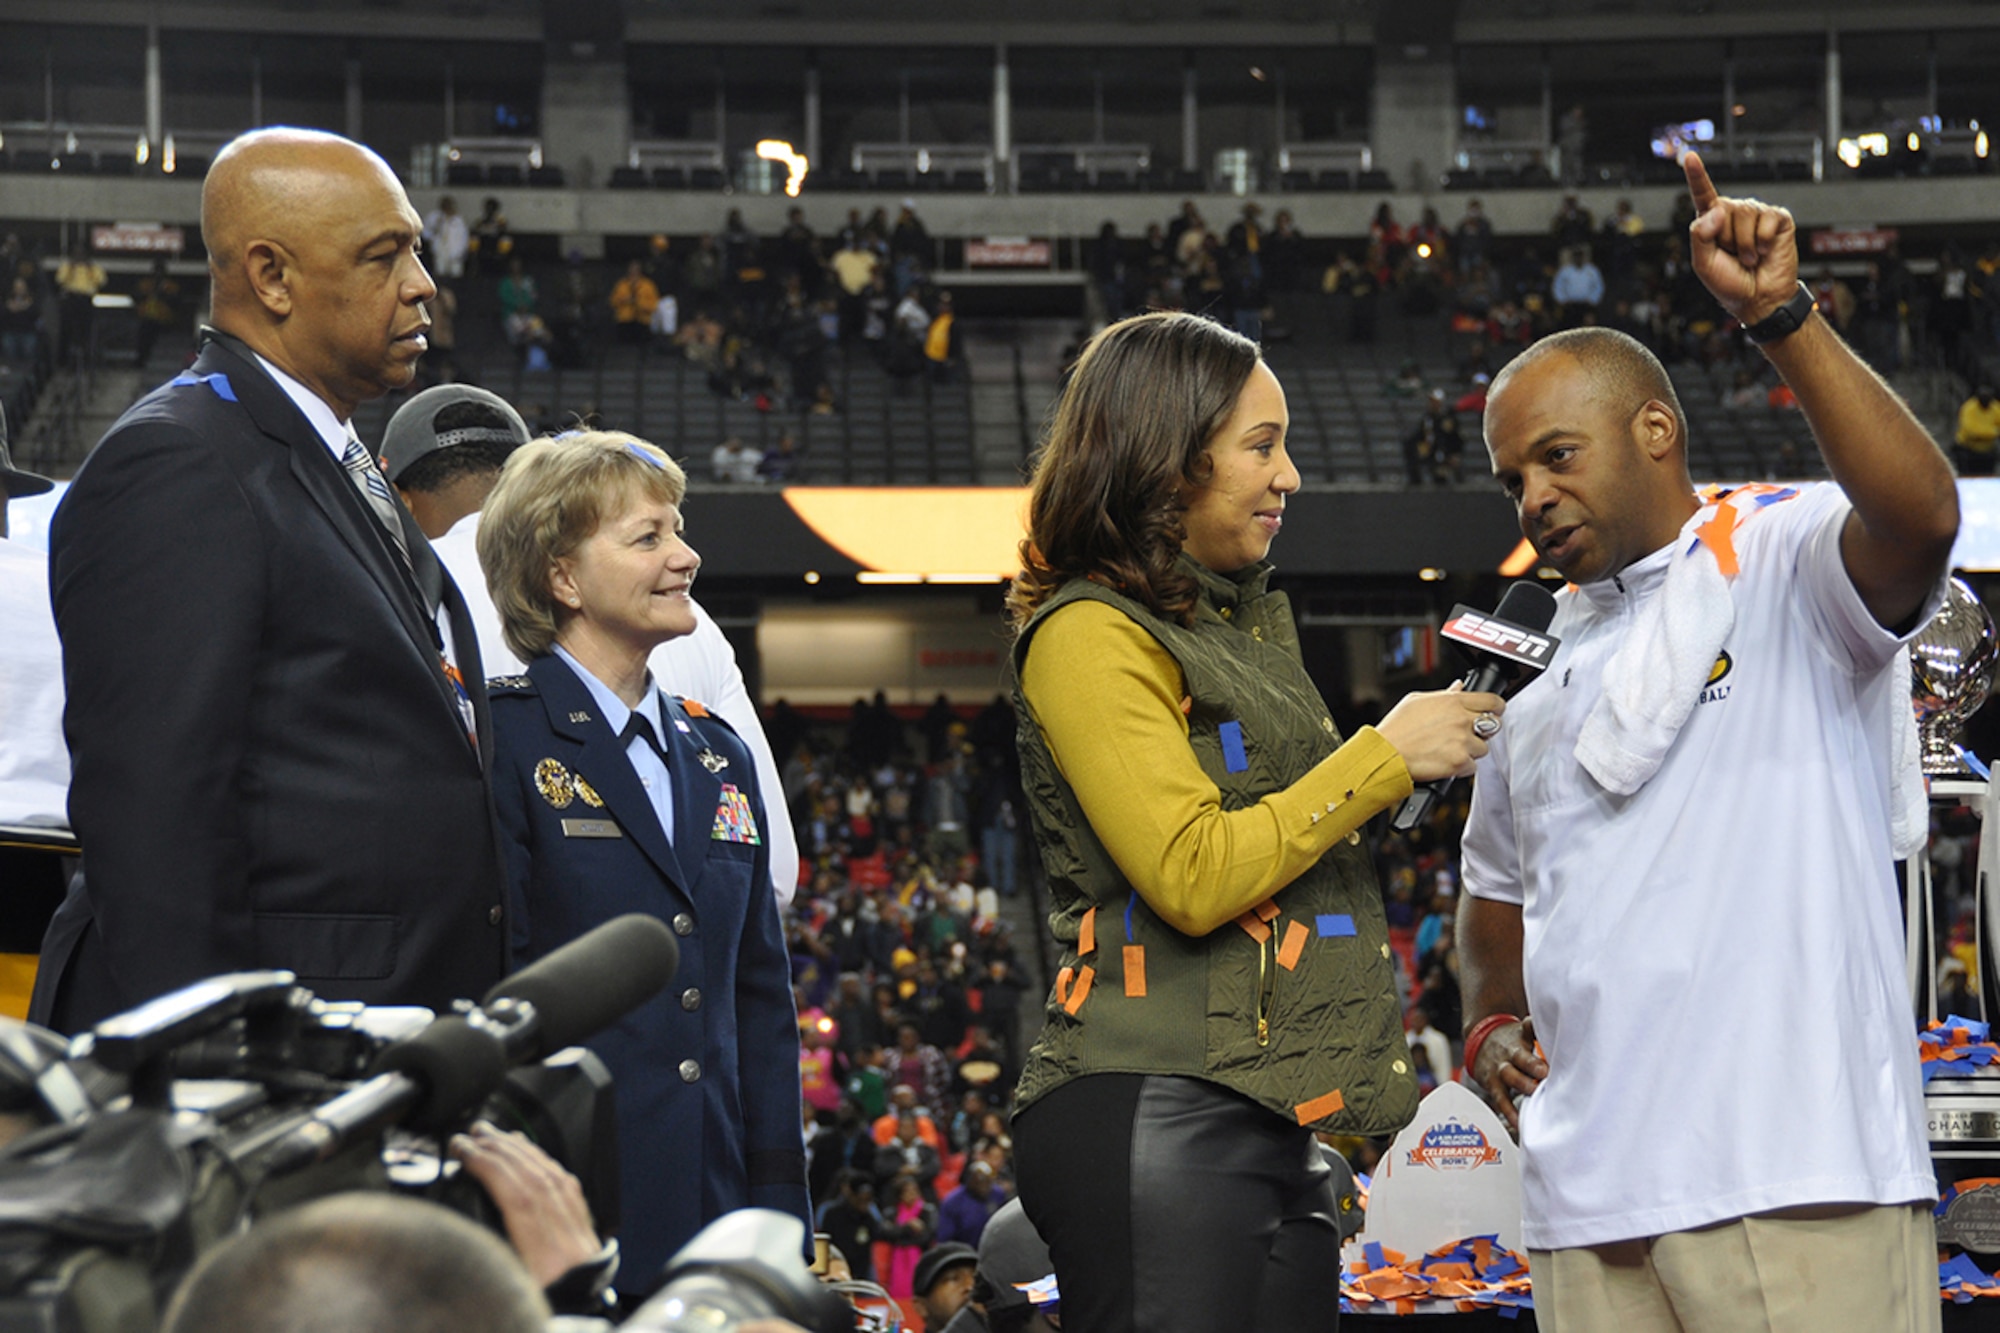 Lt. Gen. Maryanne Miller, chief of Air Force Reserve and commander of Air Force Reserve Command; John T. Grant, event executive director; and ESPN announcer Tiffany Greene congratulate Broderick Fobbs, Grambling State University head football coach, on his team winning the Air Force Reserve Celebration Bowl Dec. 17 at the Georgia Dome in Atlanta. (U.S. Air Force photo/Master Sgt. James Branch)